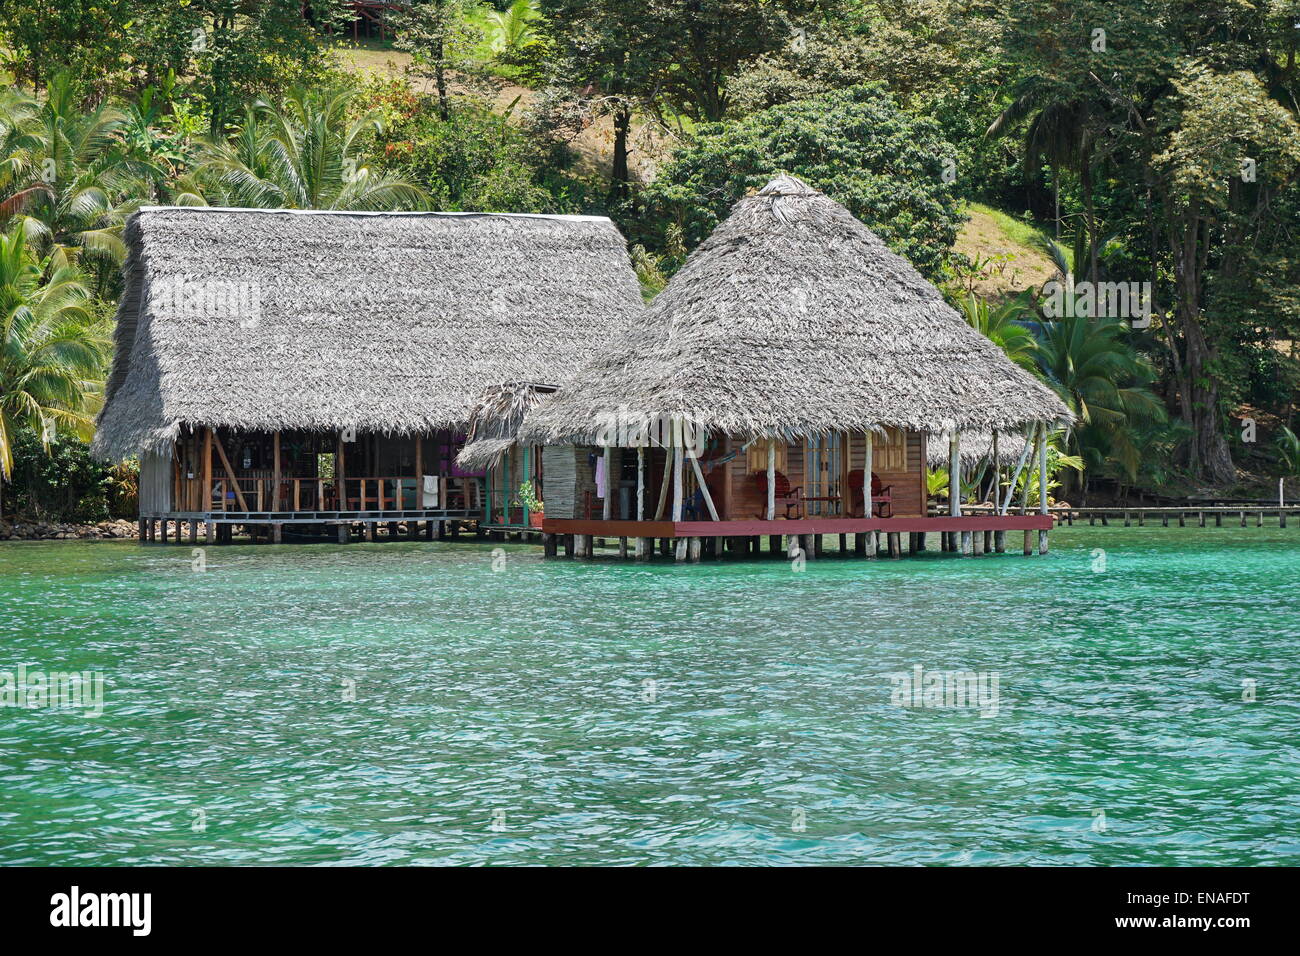 Tropical ecolodge over the water with thatched roof made from leaves of palm trees, Caribbean coast of Panama, Central America Stock Photo